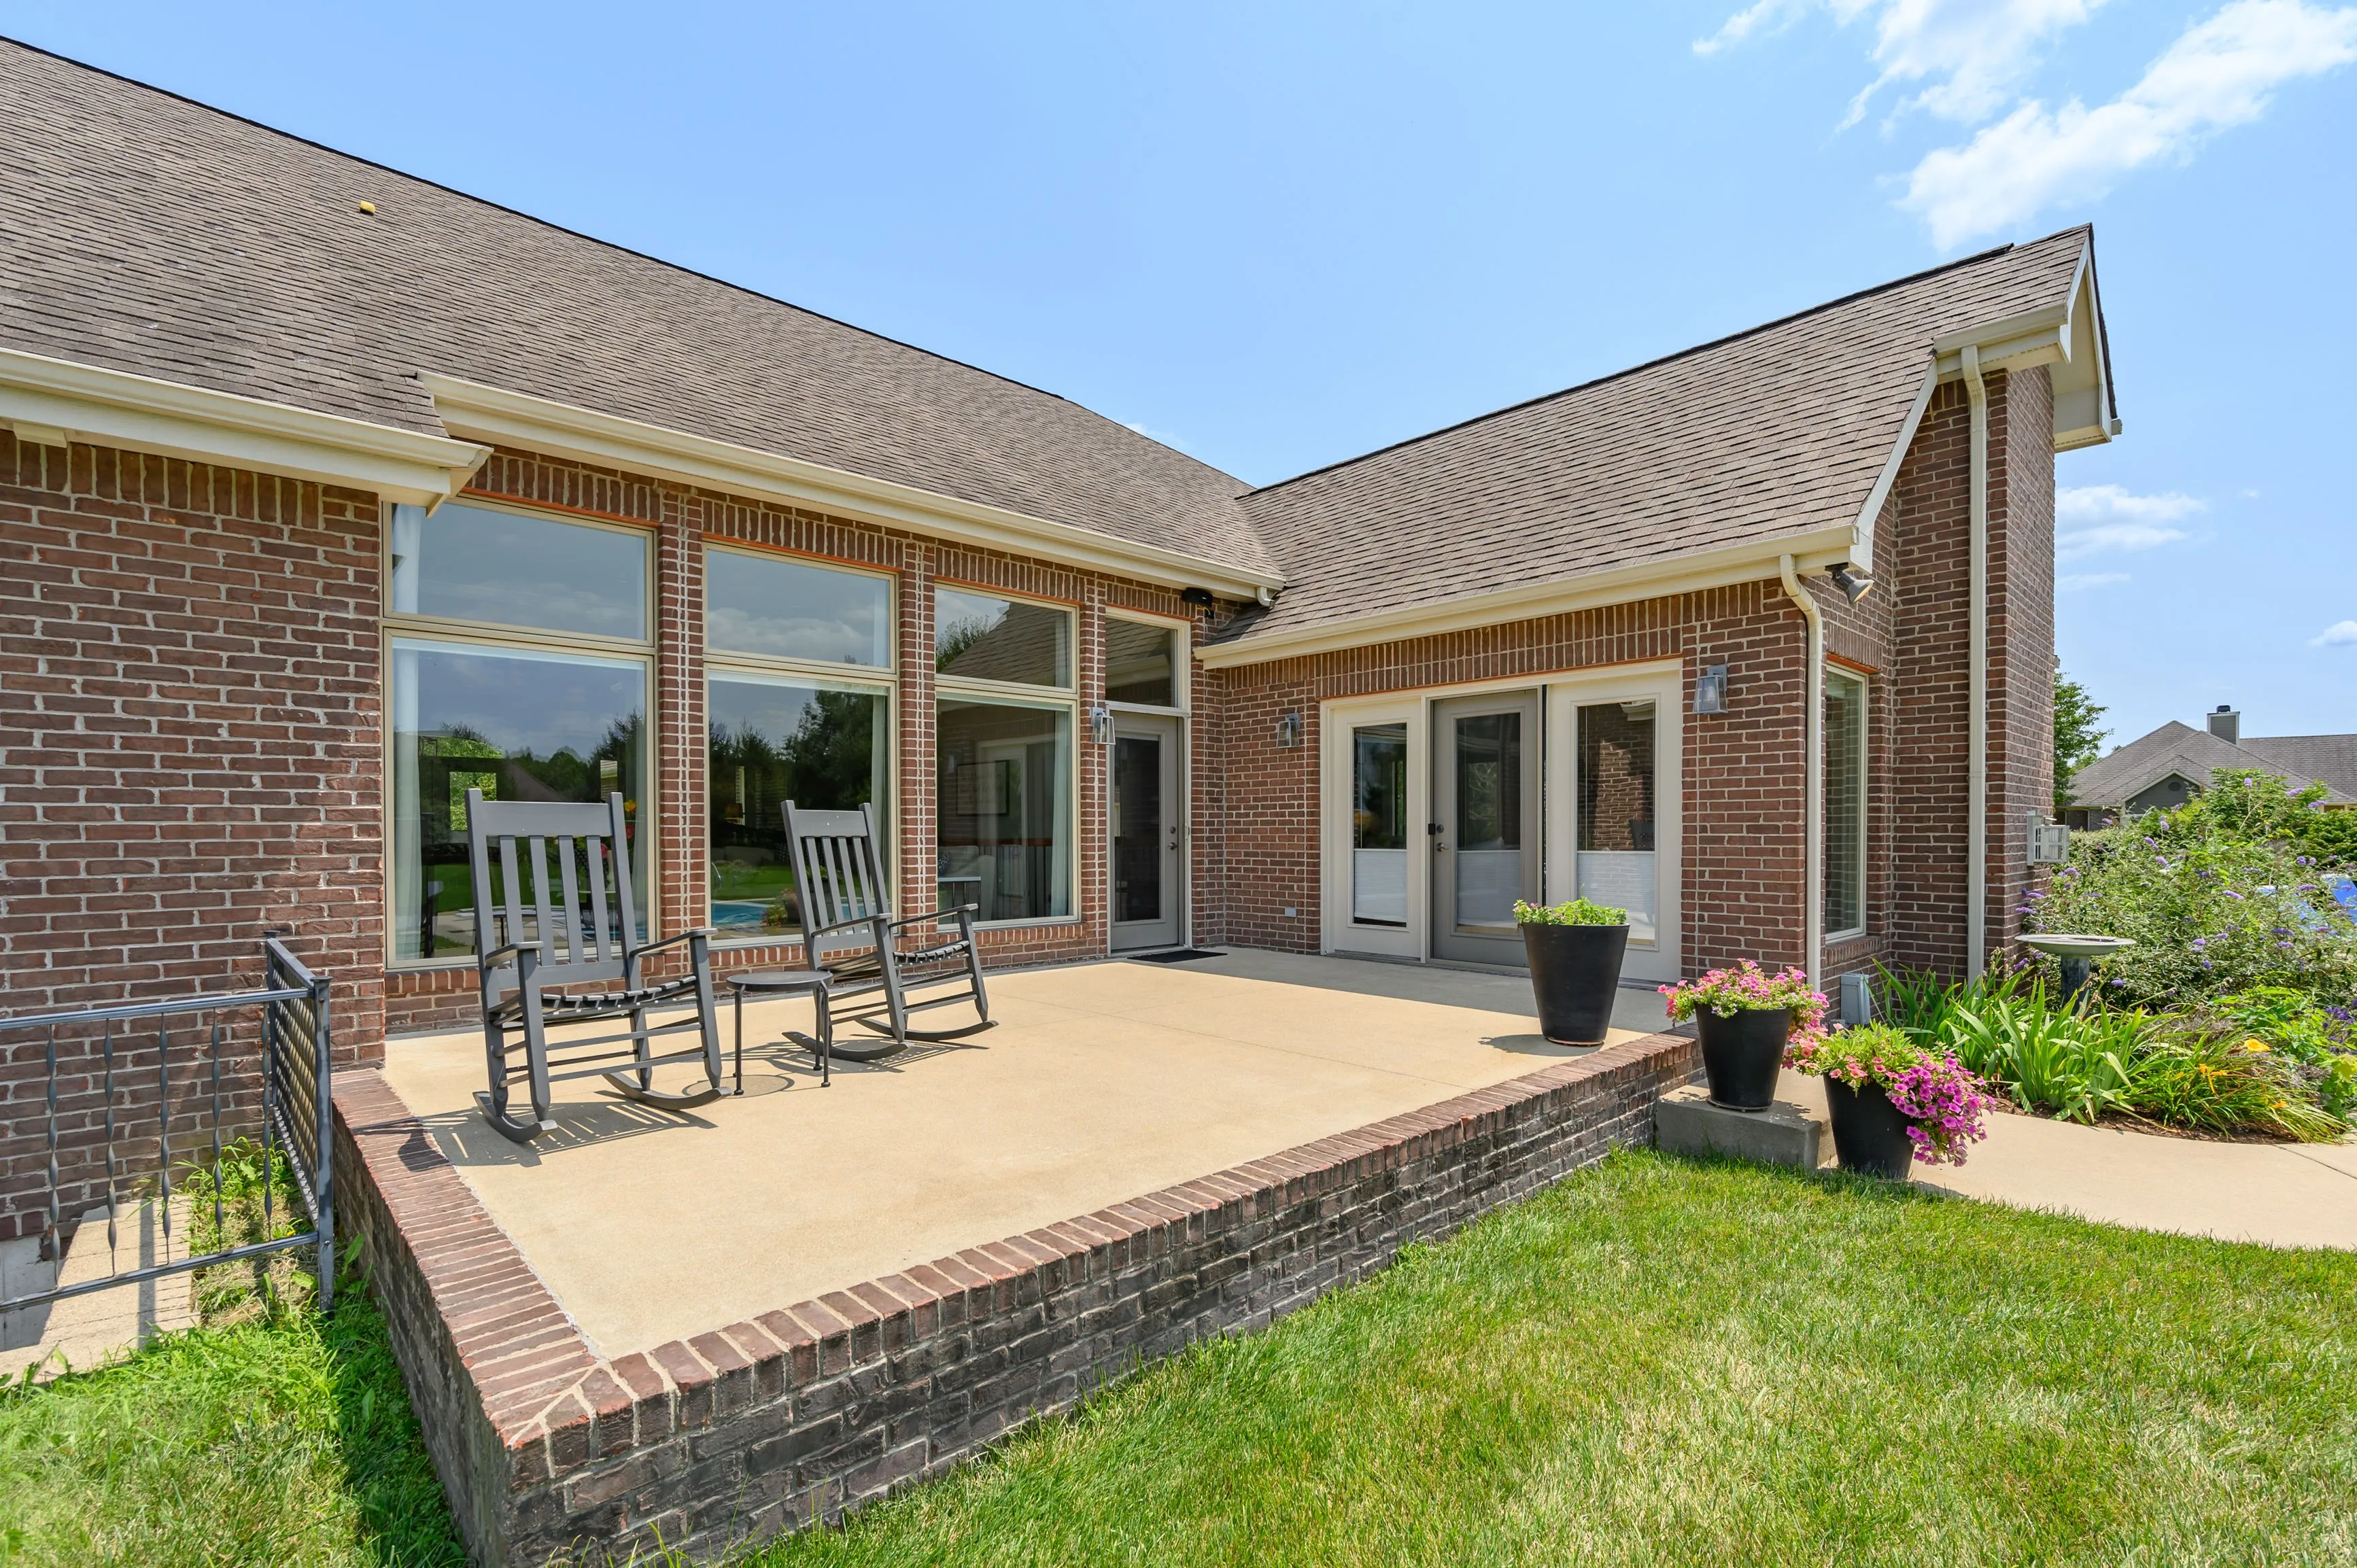 Exterior view of a brick house with large windows and a patio featuring rocking chairs.